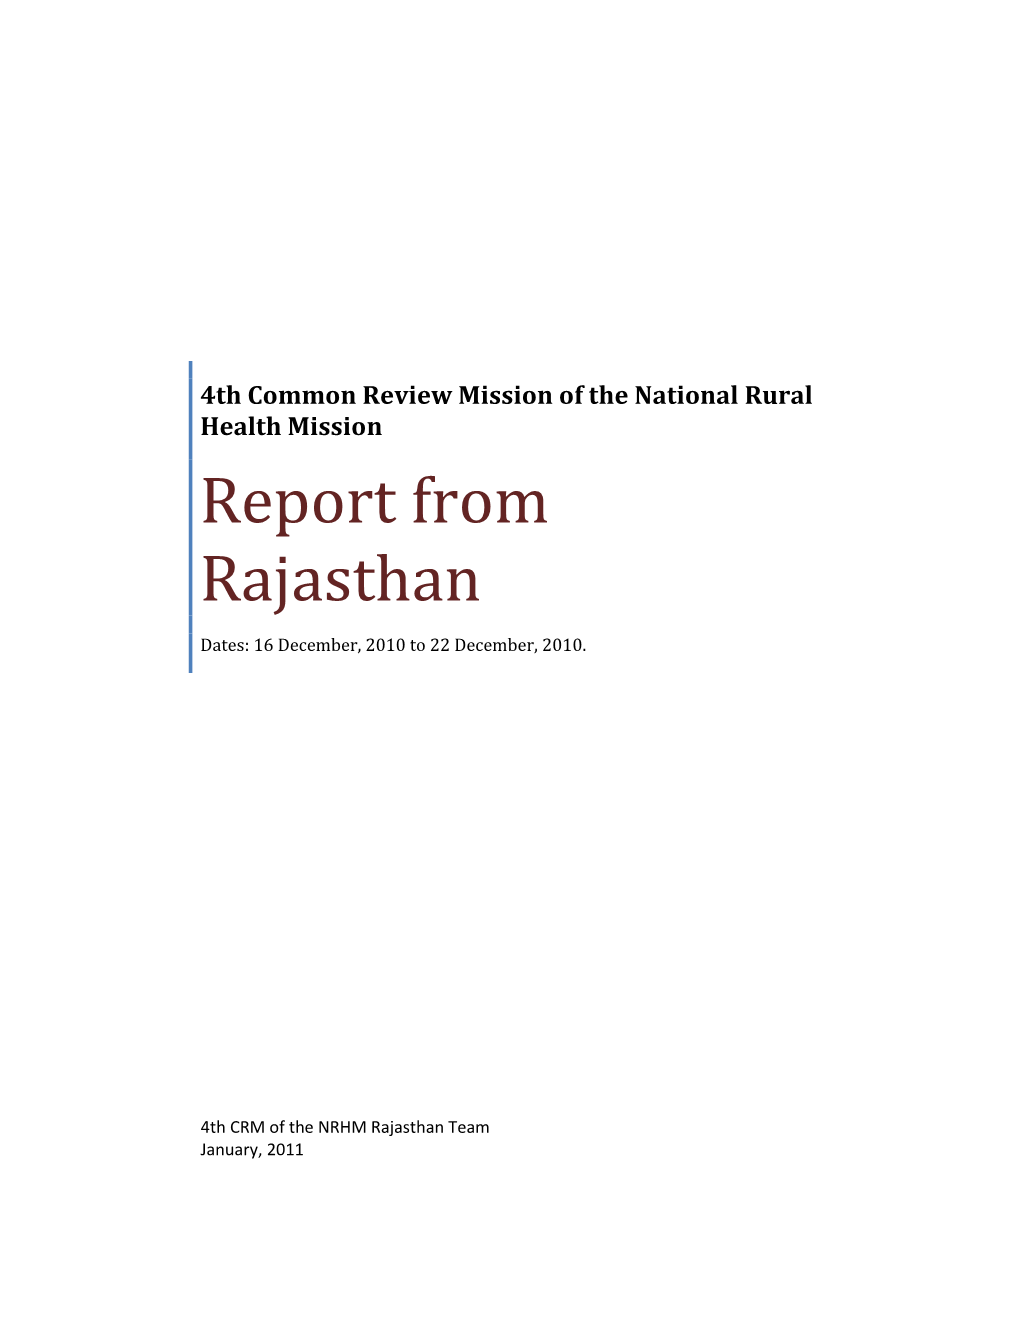 Report from Rajasthan